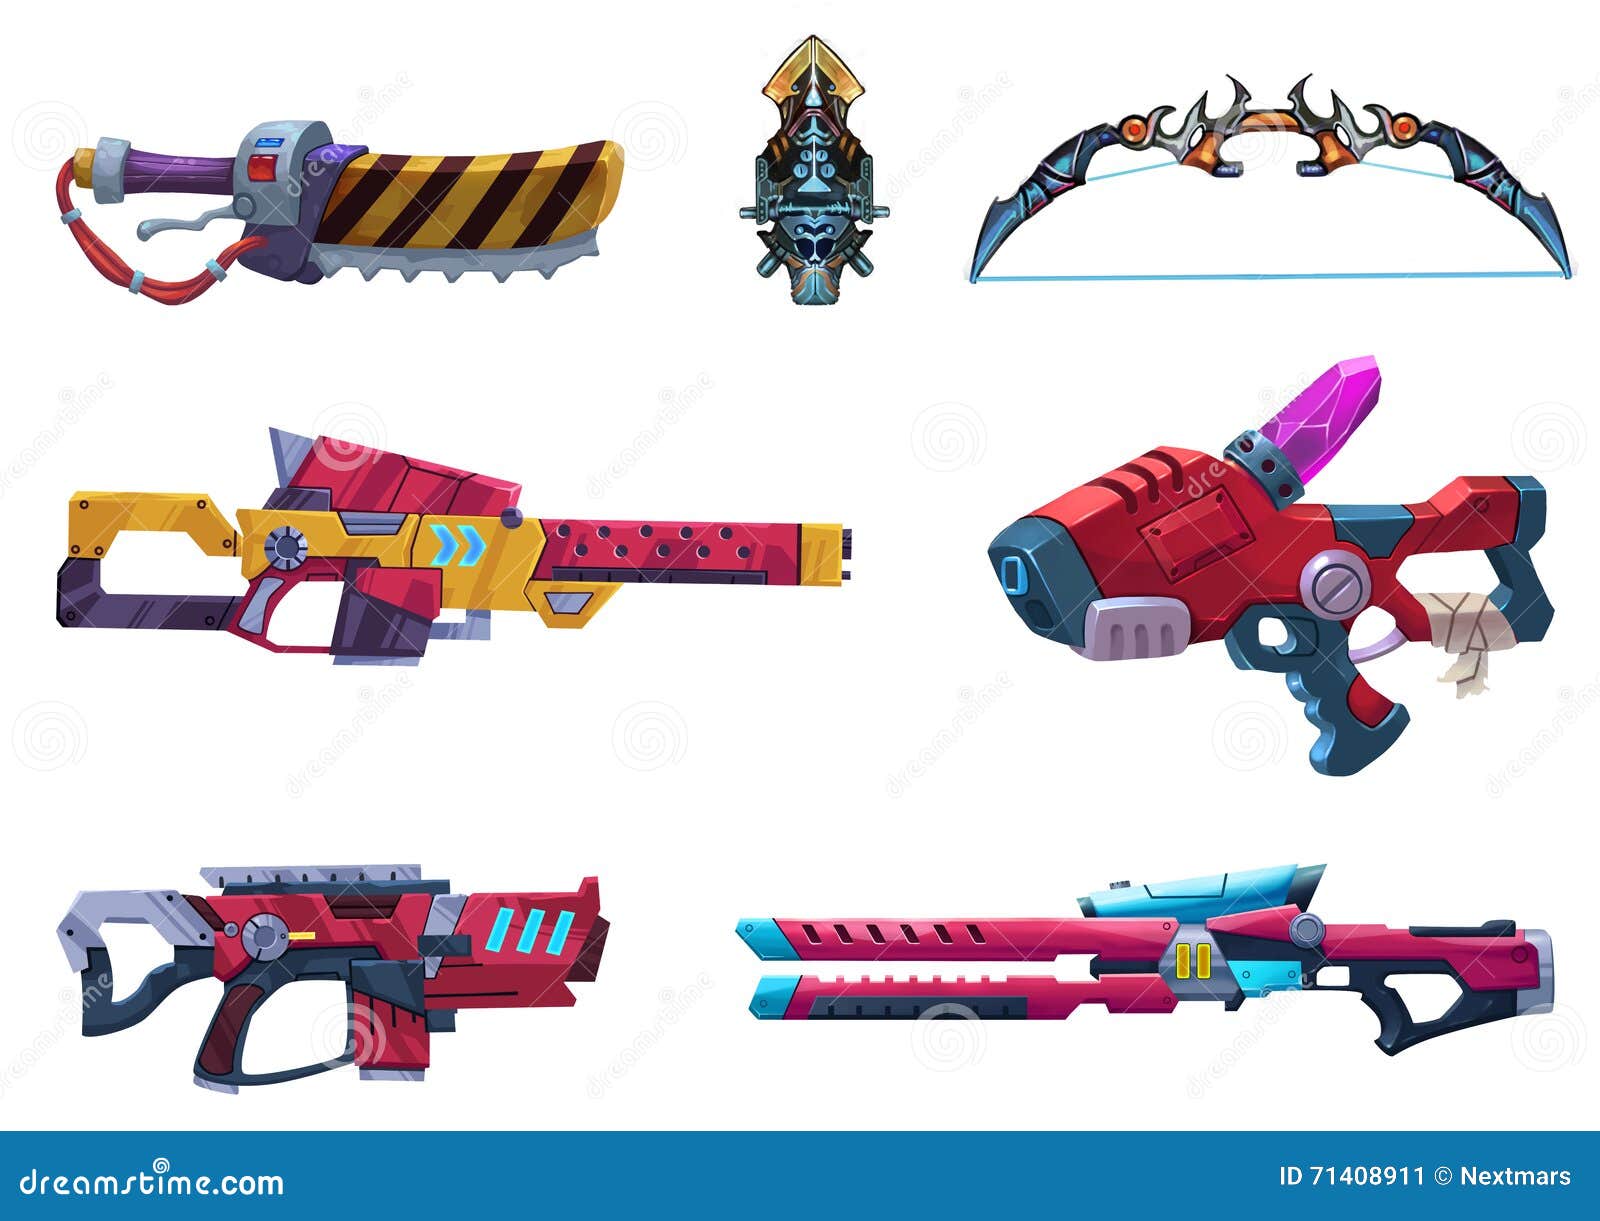 : futuristic weapon arsenal with white background.